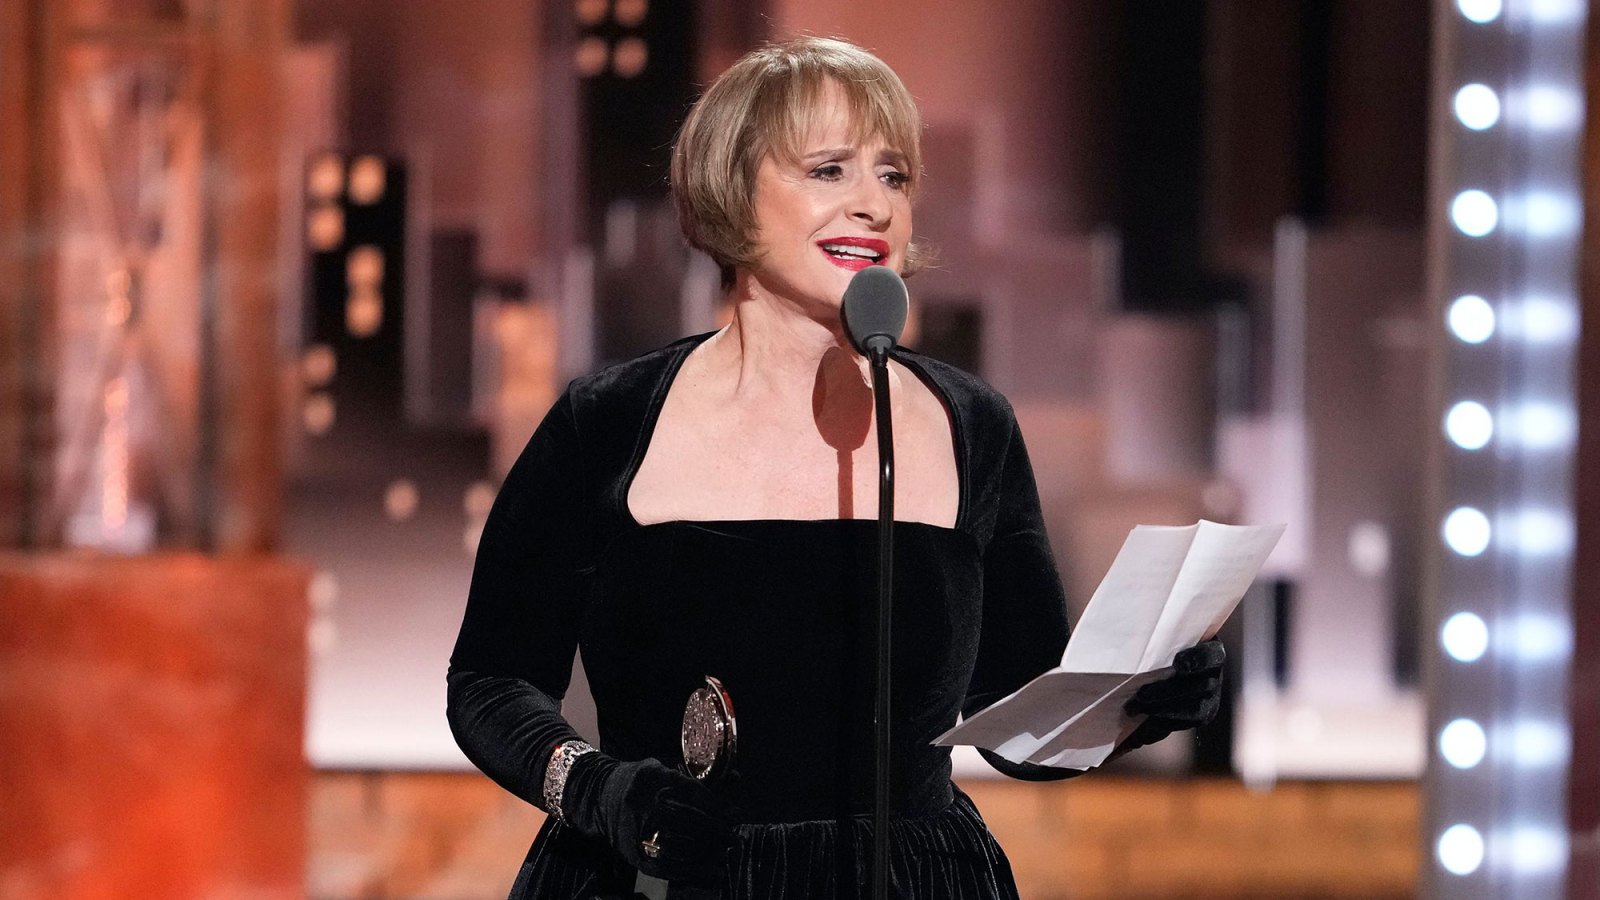 Tony Awards 2022 Complete List of Nominees and Winners